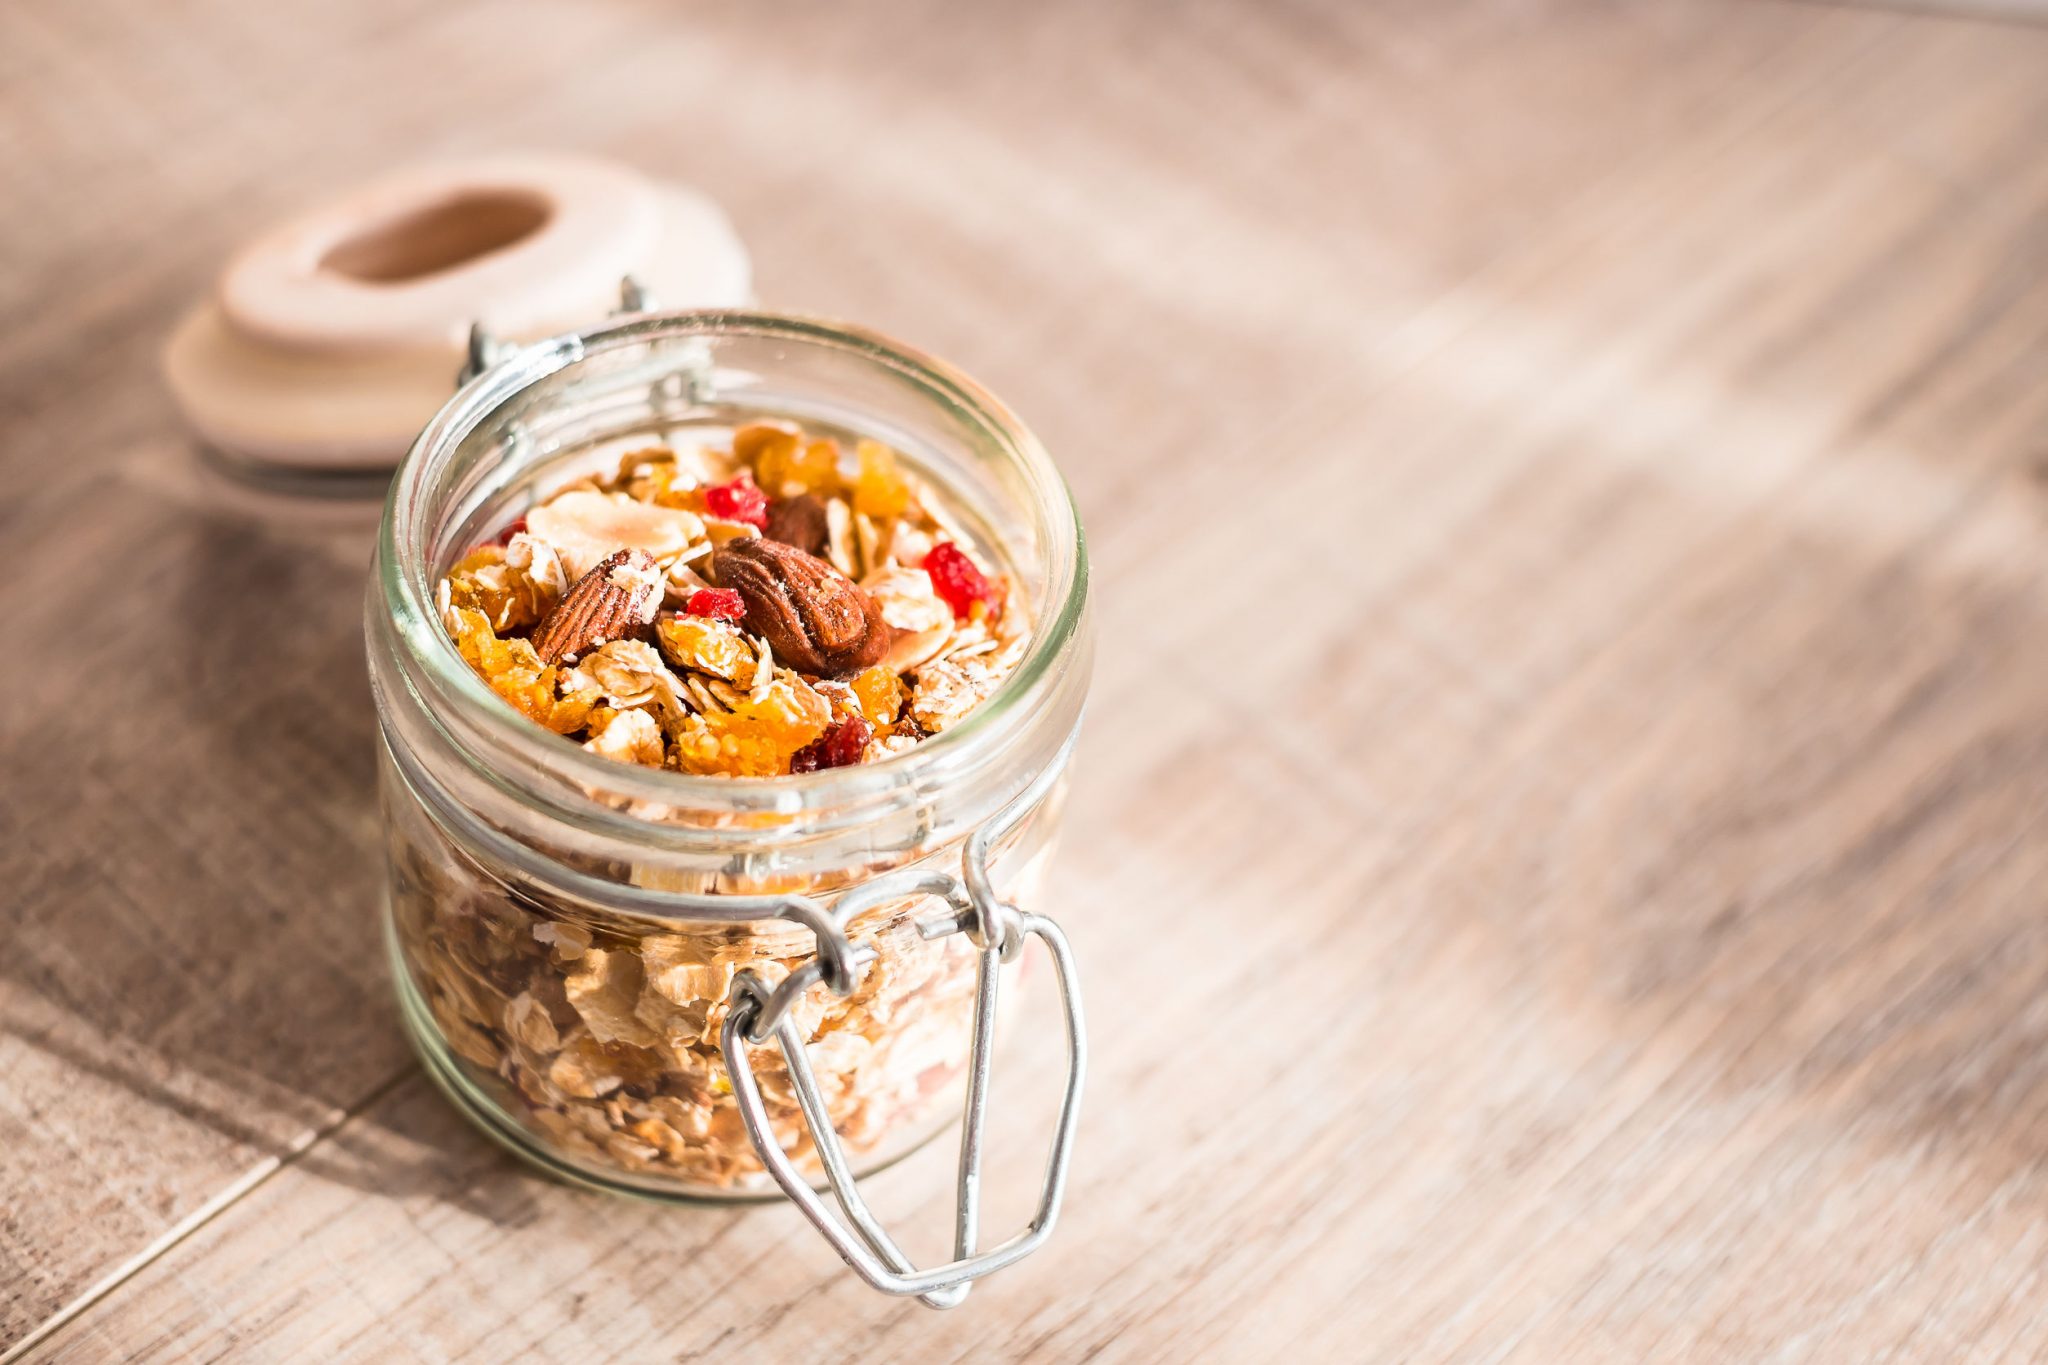 Try These 5 Trail Mixes At Home - SMDC - The Good Life